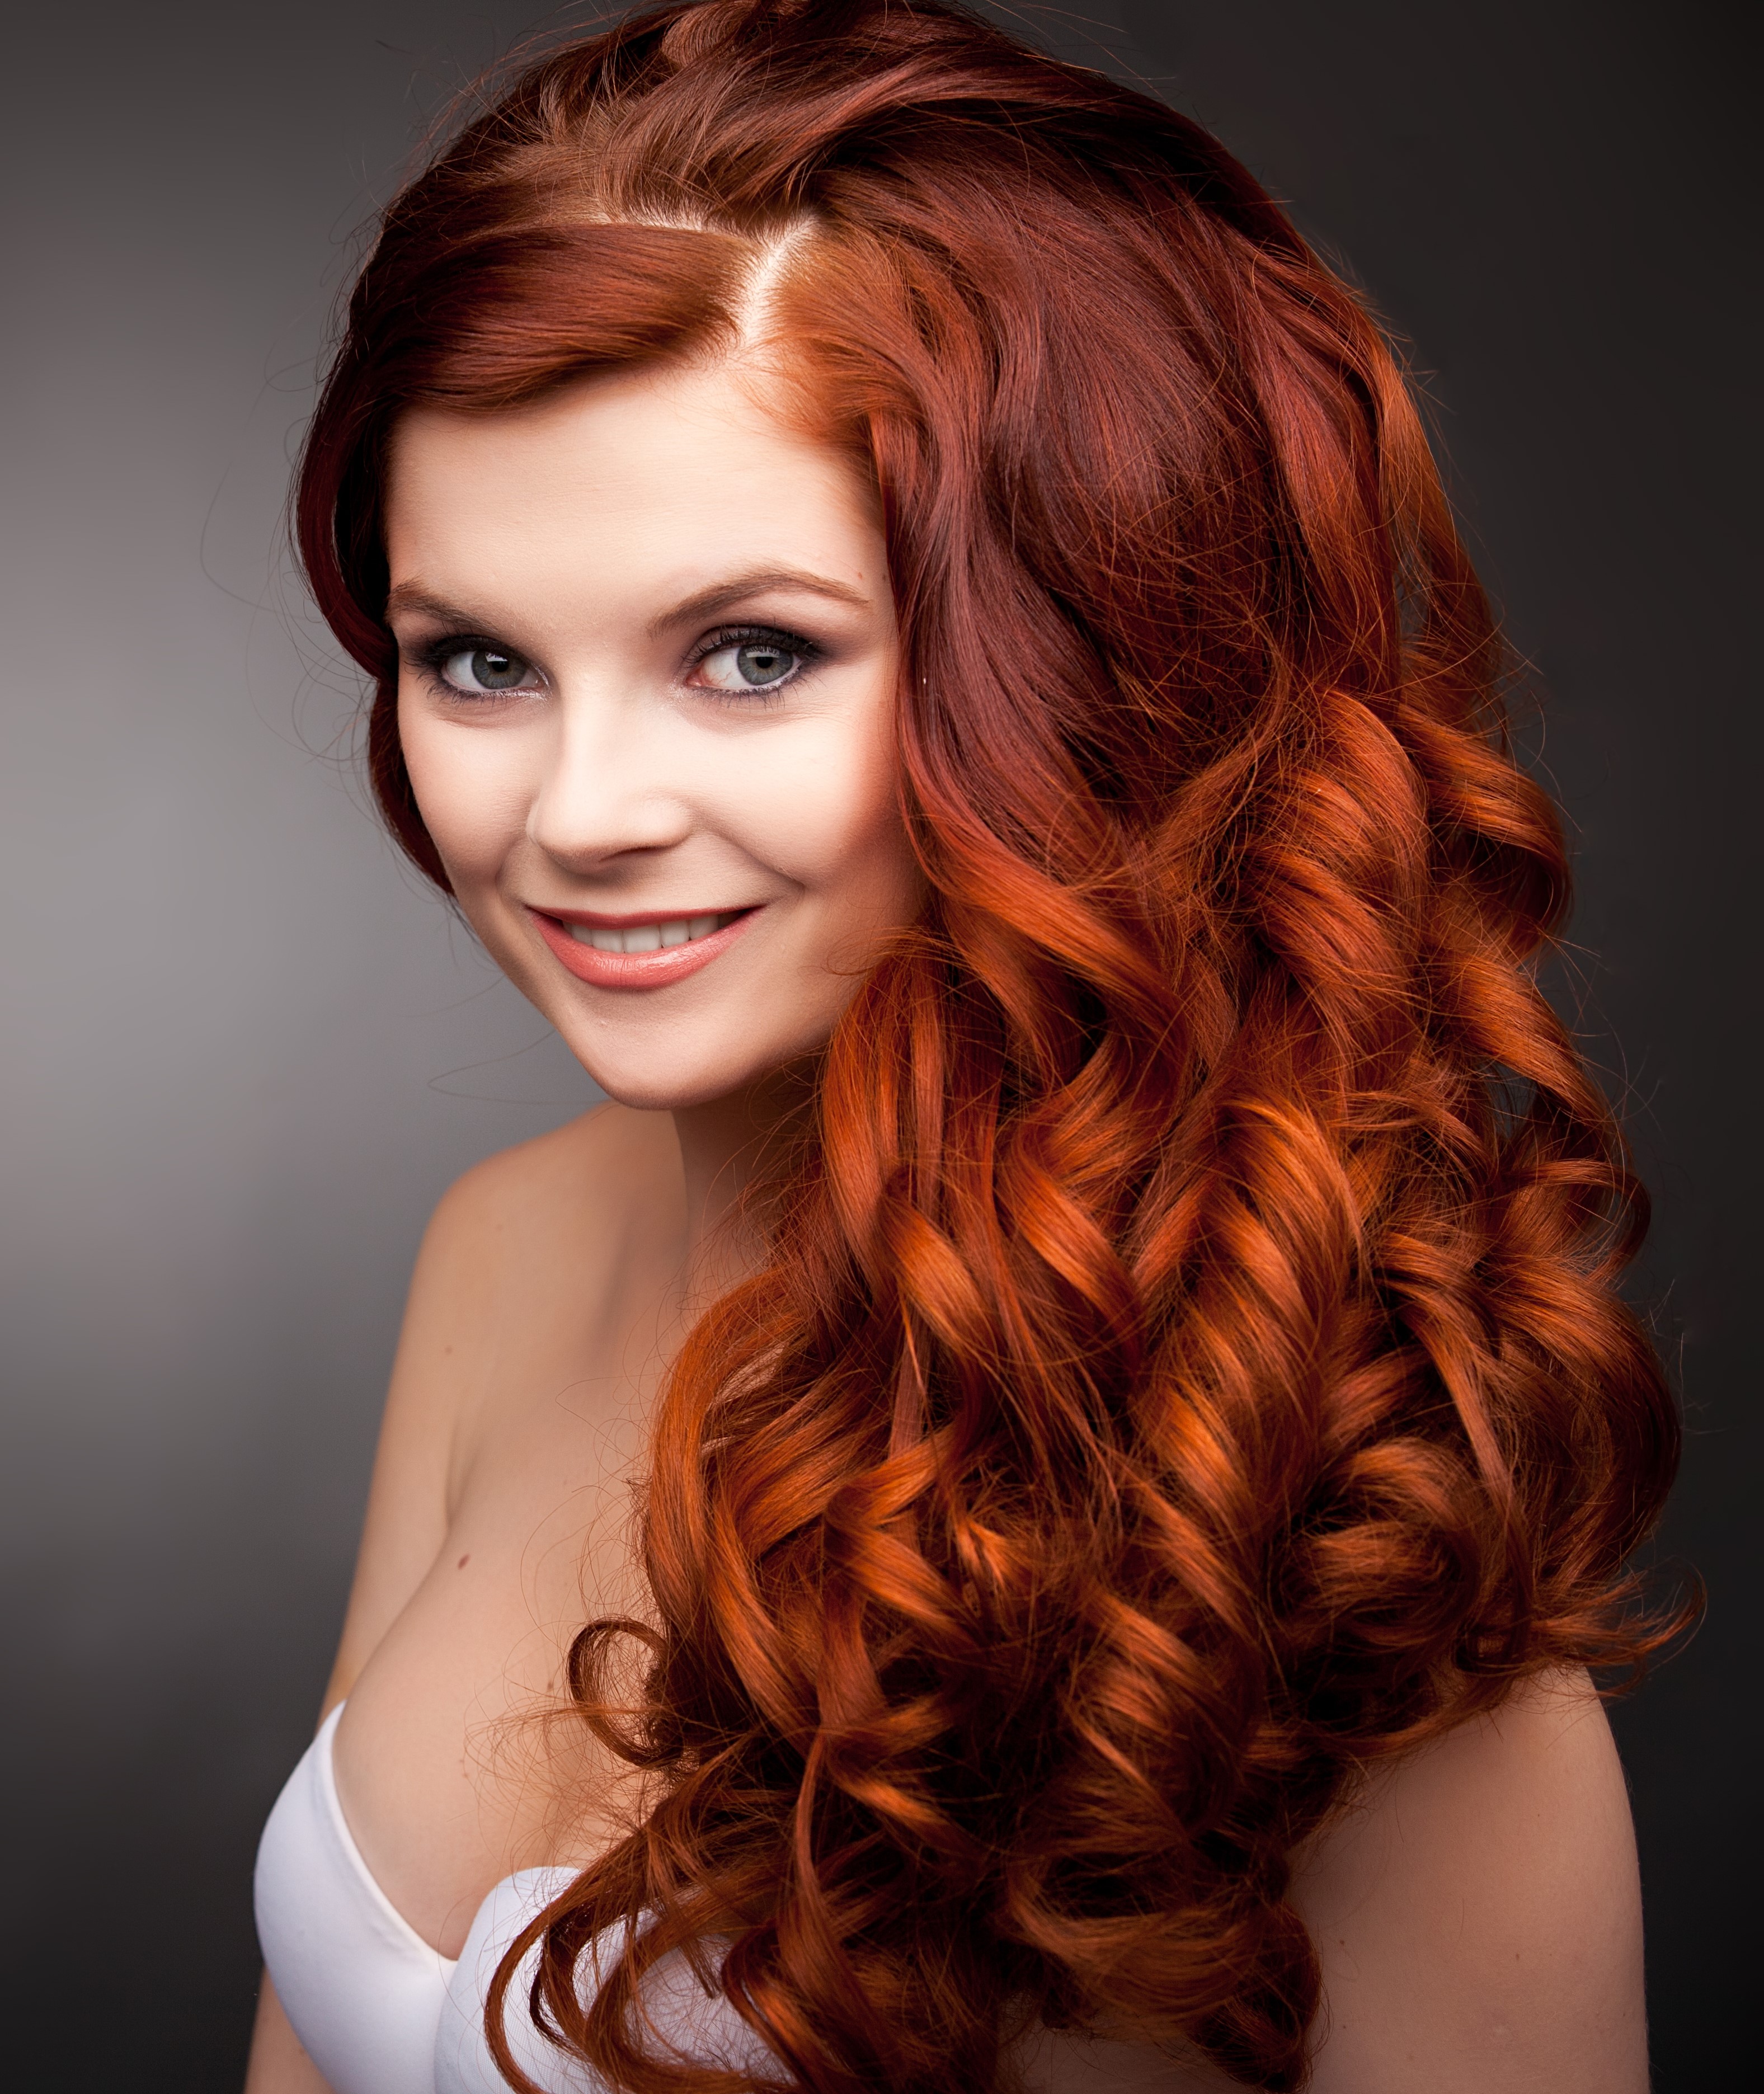 Woman with Colored Red Hair